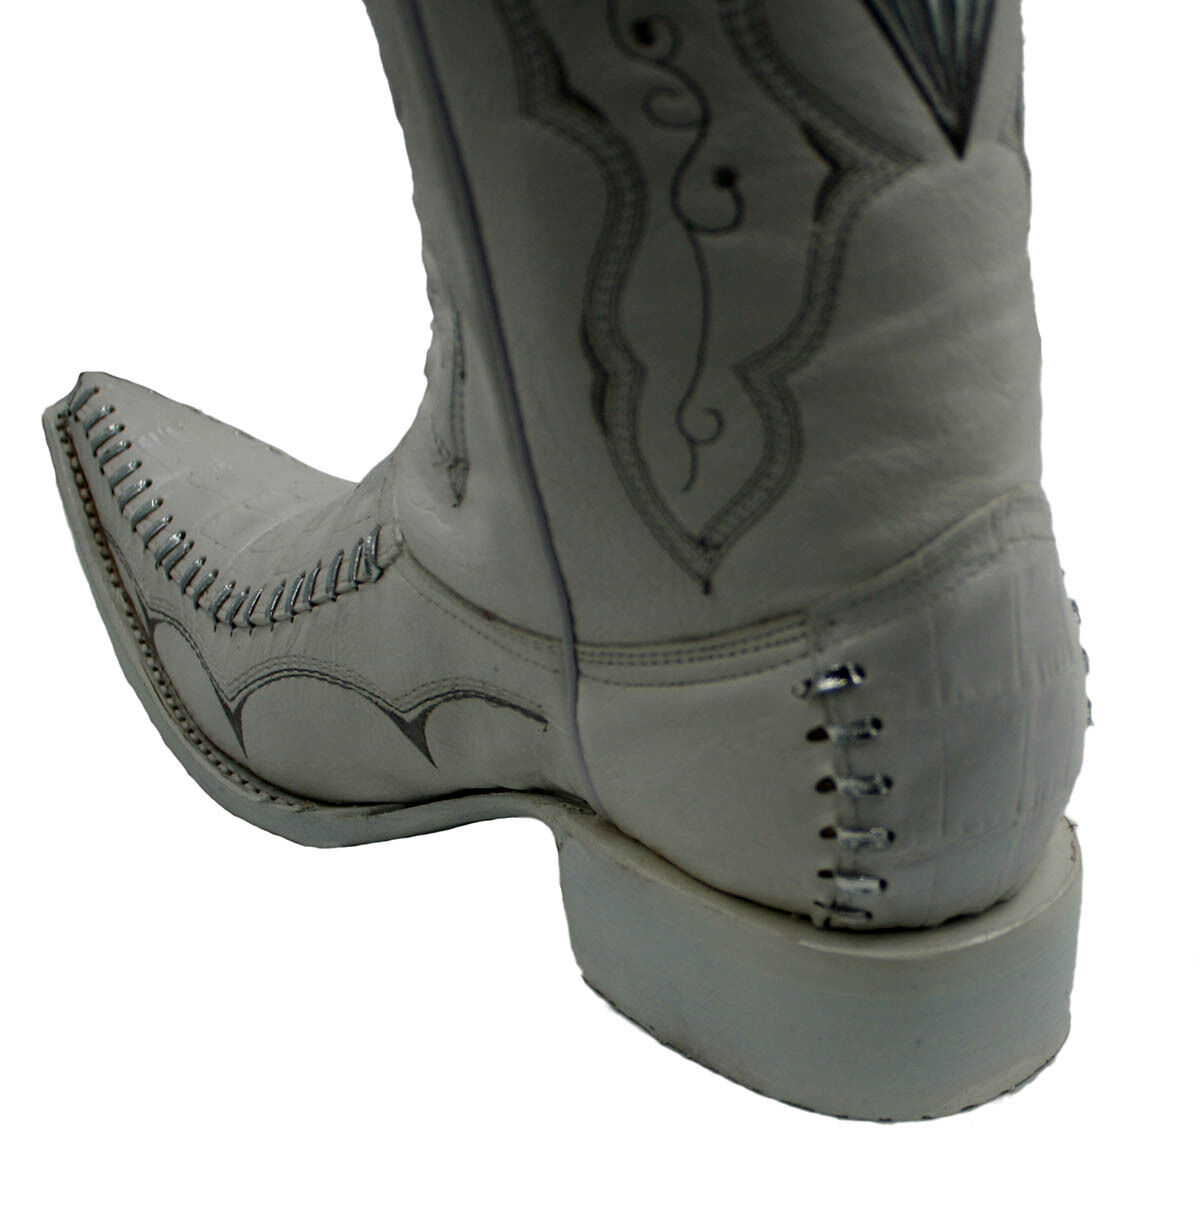 Mens Cowboy Boots Made of Leather Crocodile Print 3x Style-WD1342